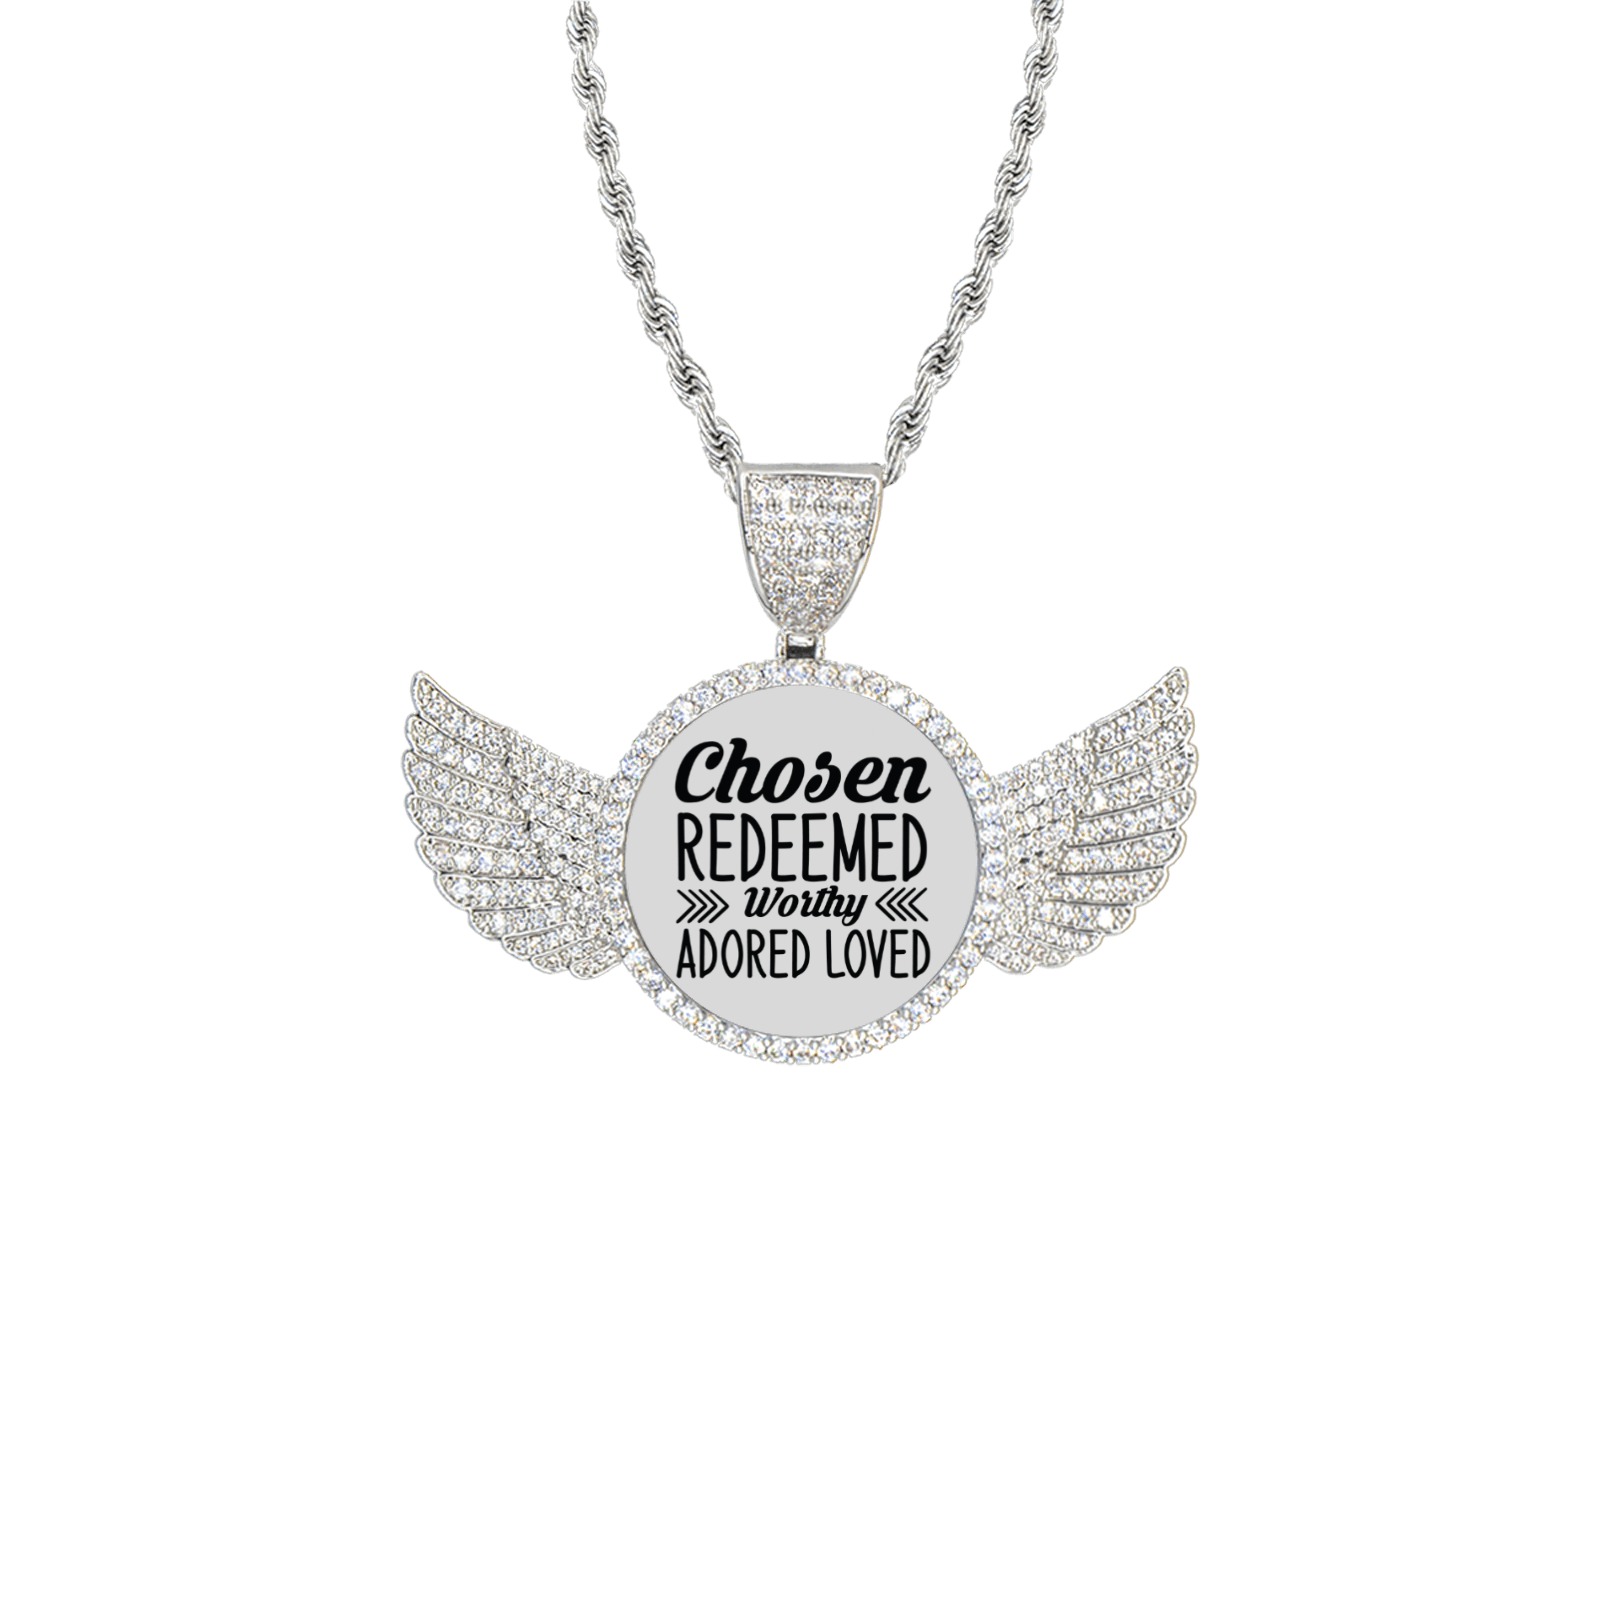 Chosen Redeemed Worthy Adored Loved Wings Silver Photo Pendant with Rope Chain